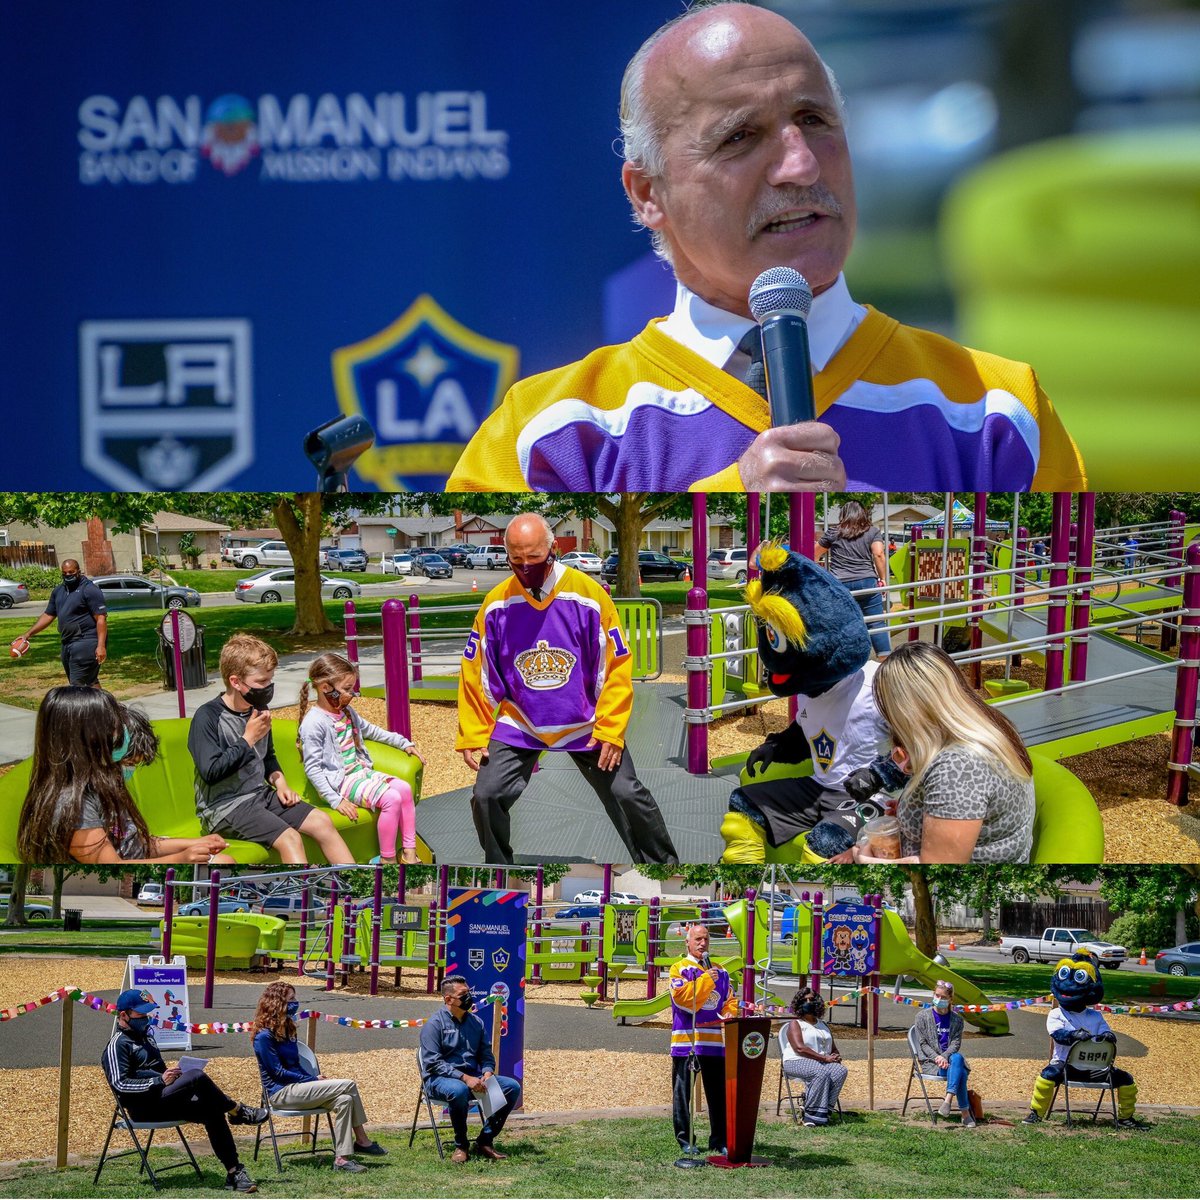 It was an honor to Emcee the official opening of the all accessible playground at Lionel E. Hudson Park @SanManuel@lakings@lagalaxy@kaboom ADA -compliant ramps and sidewalks from the parking lot to the playground #SMBMI
#NativePride #PlaySpaceEquity #SMCares